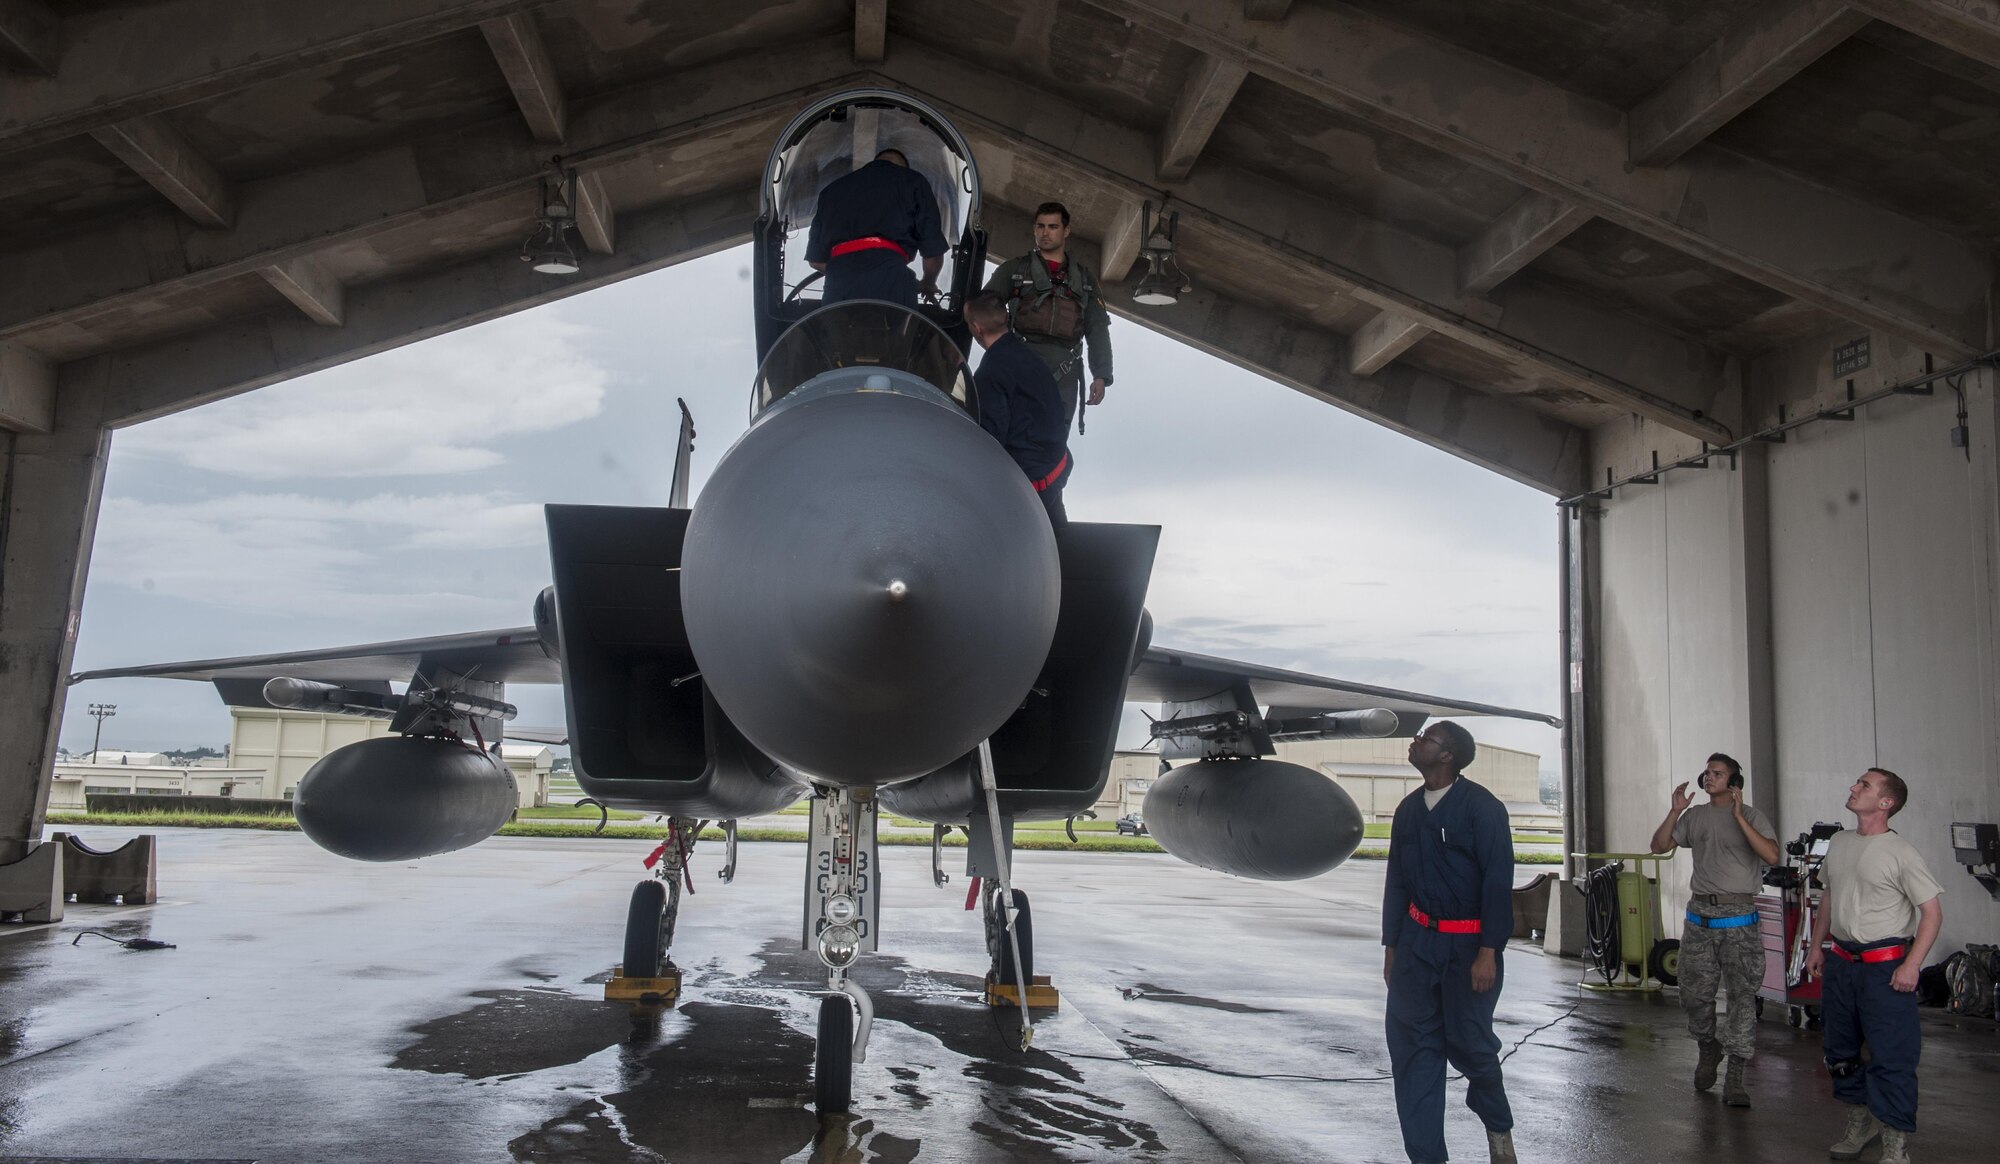 Airmen from the 18th Aircraft Maintenance Squadron prepare an F-15 Eagle for launch Sept. 9, 2016, at Kadena Air Base, Japan. The 18th AMXS supports Exercise Valiant Shield with F-15s from the 67th Fighter Squadron. Kadena’s pilots work with pilots from other branches of the U.S. armed forces during the exercise. (U.S. Air Force photo by Senior Airman Lynette M. Rolen)